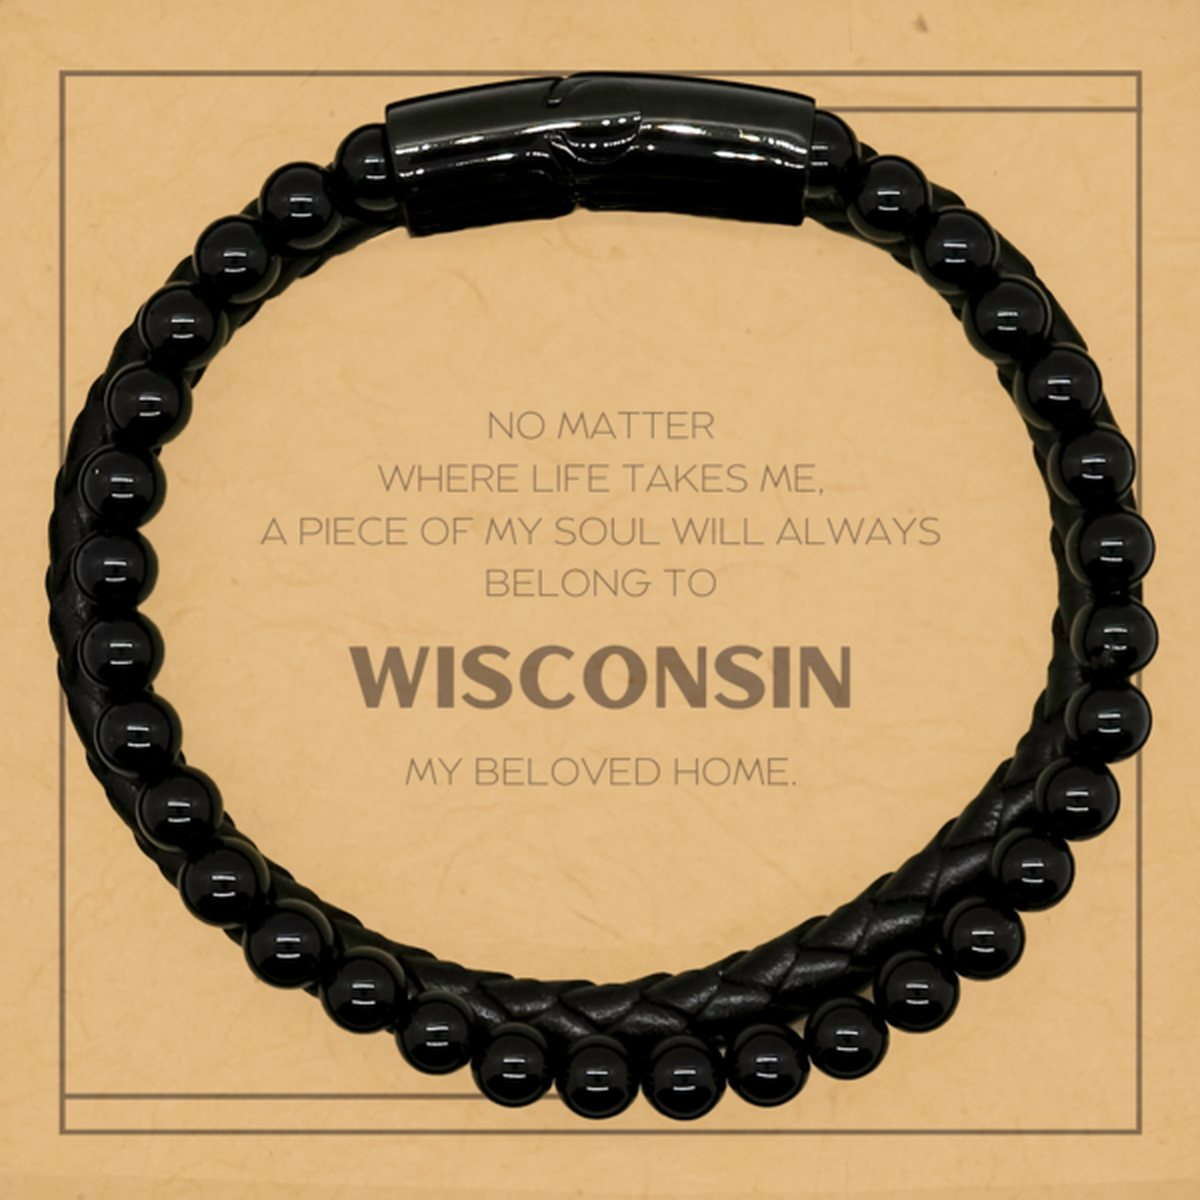 Love Wisconsin State Gifts, My soul will always belong to Wisconsin, Proud Stone Leather Bracelets, Birthday Unique Gifts For Wisconsin Men, Women, Friends